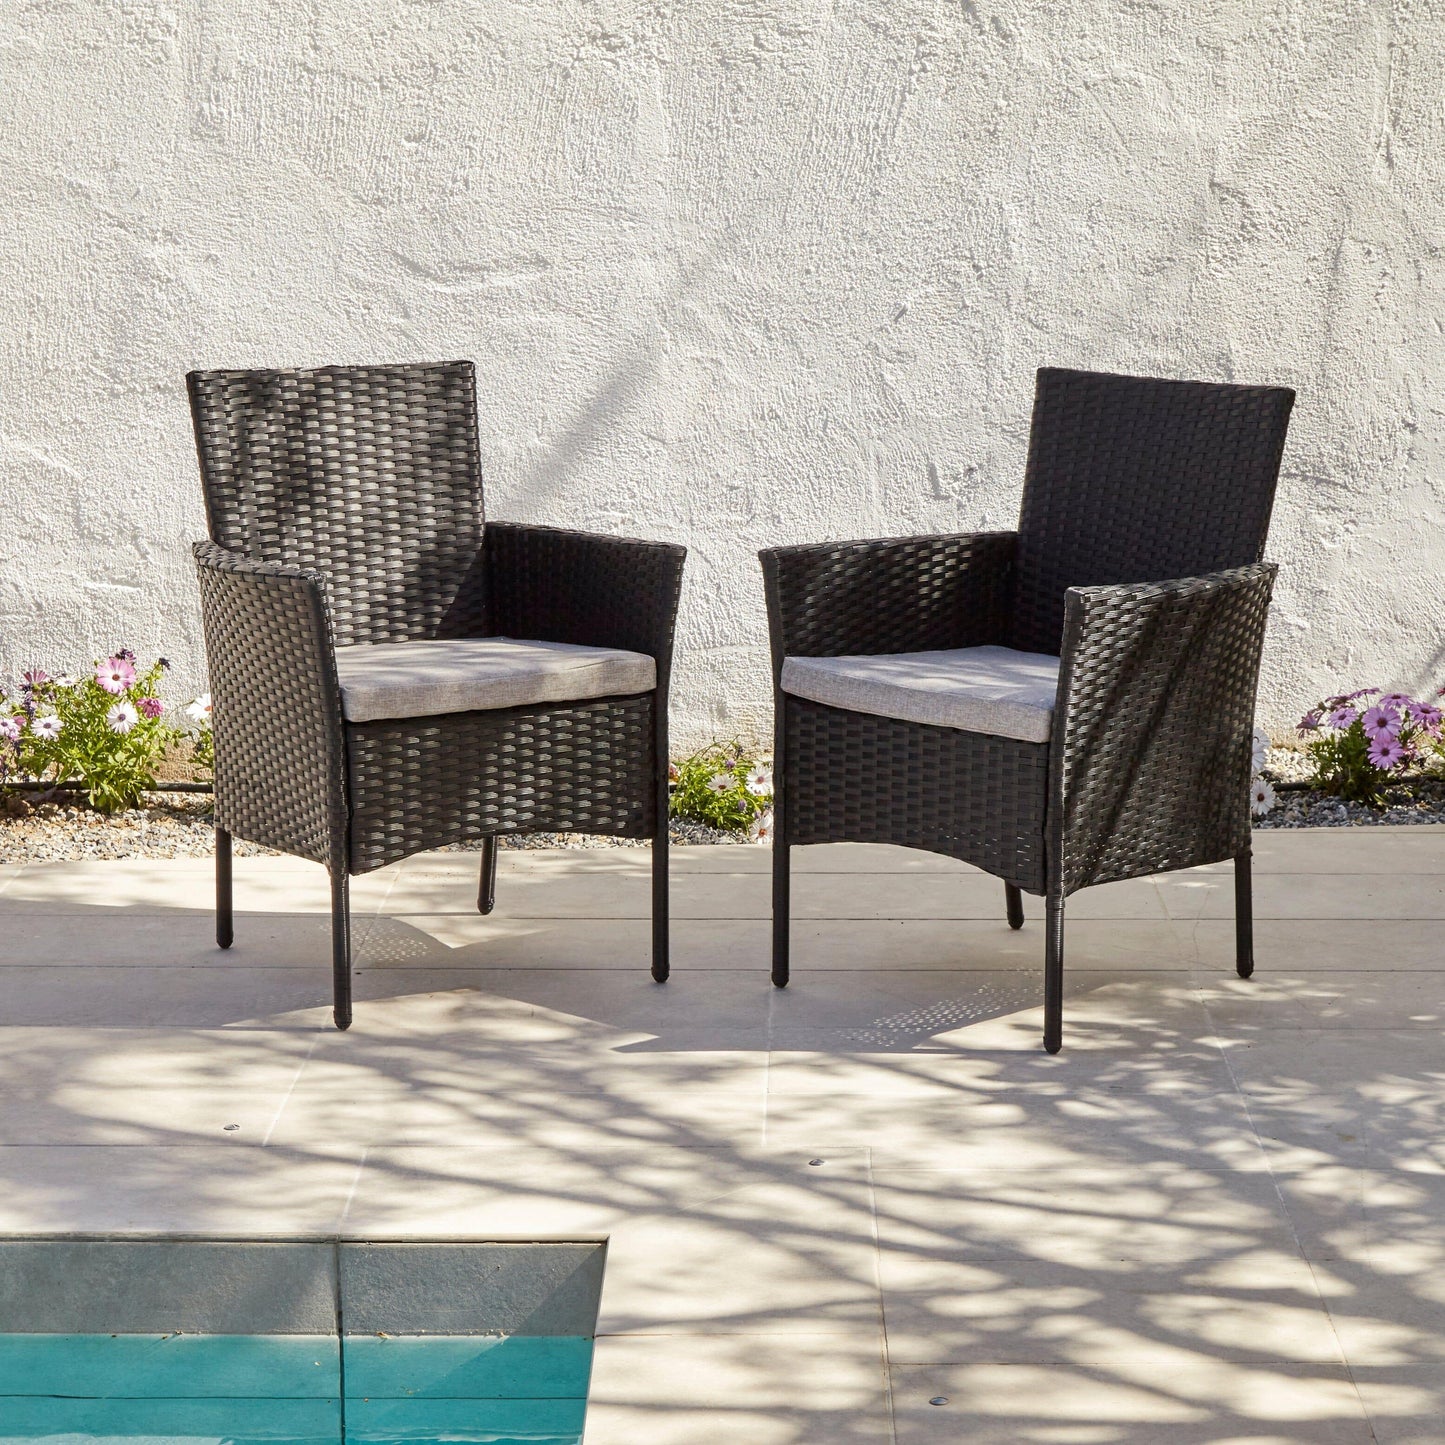 Kemble 4 Seater Rattan Round Outdoor Dining Table & Chair Set - Black - Laura James